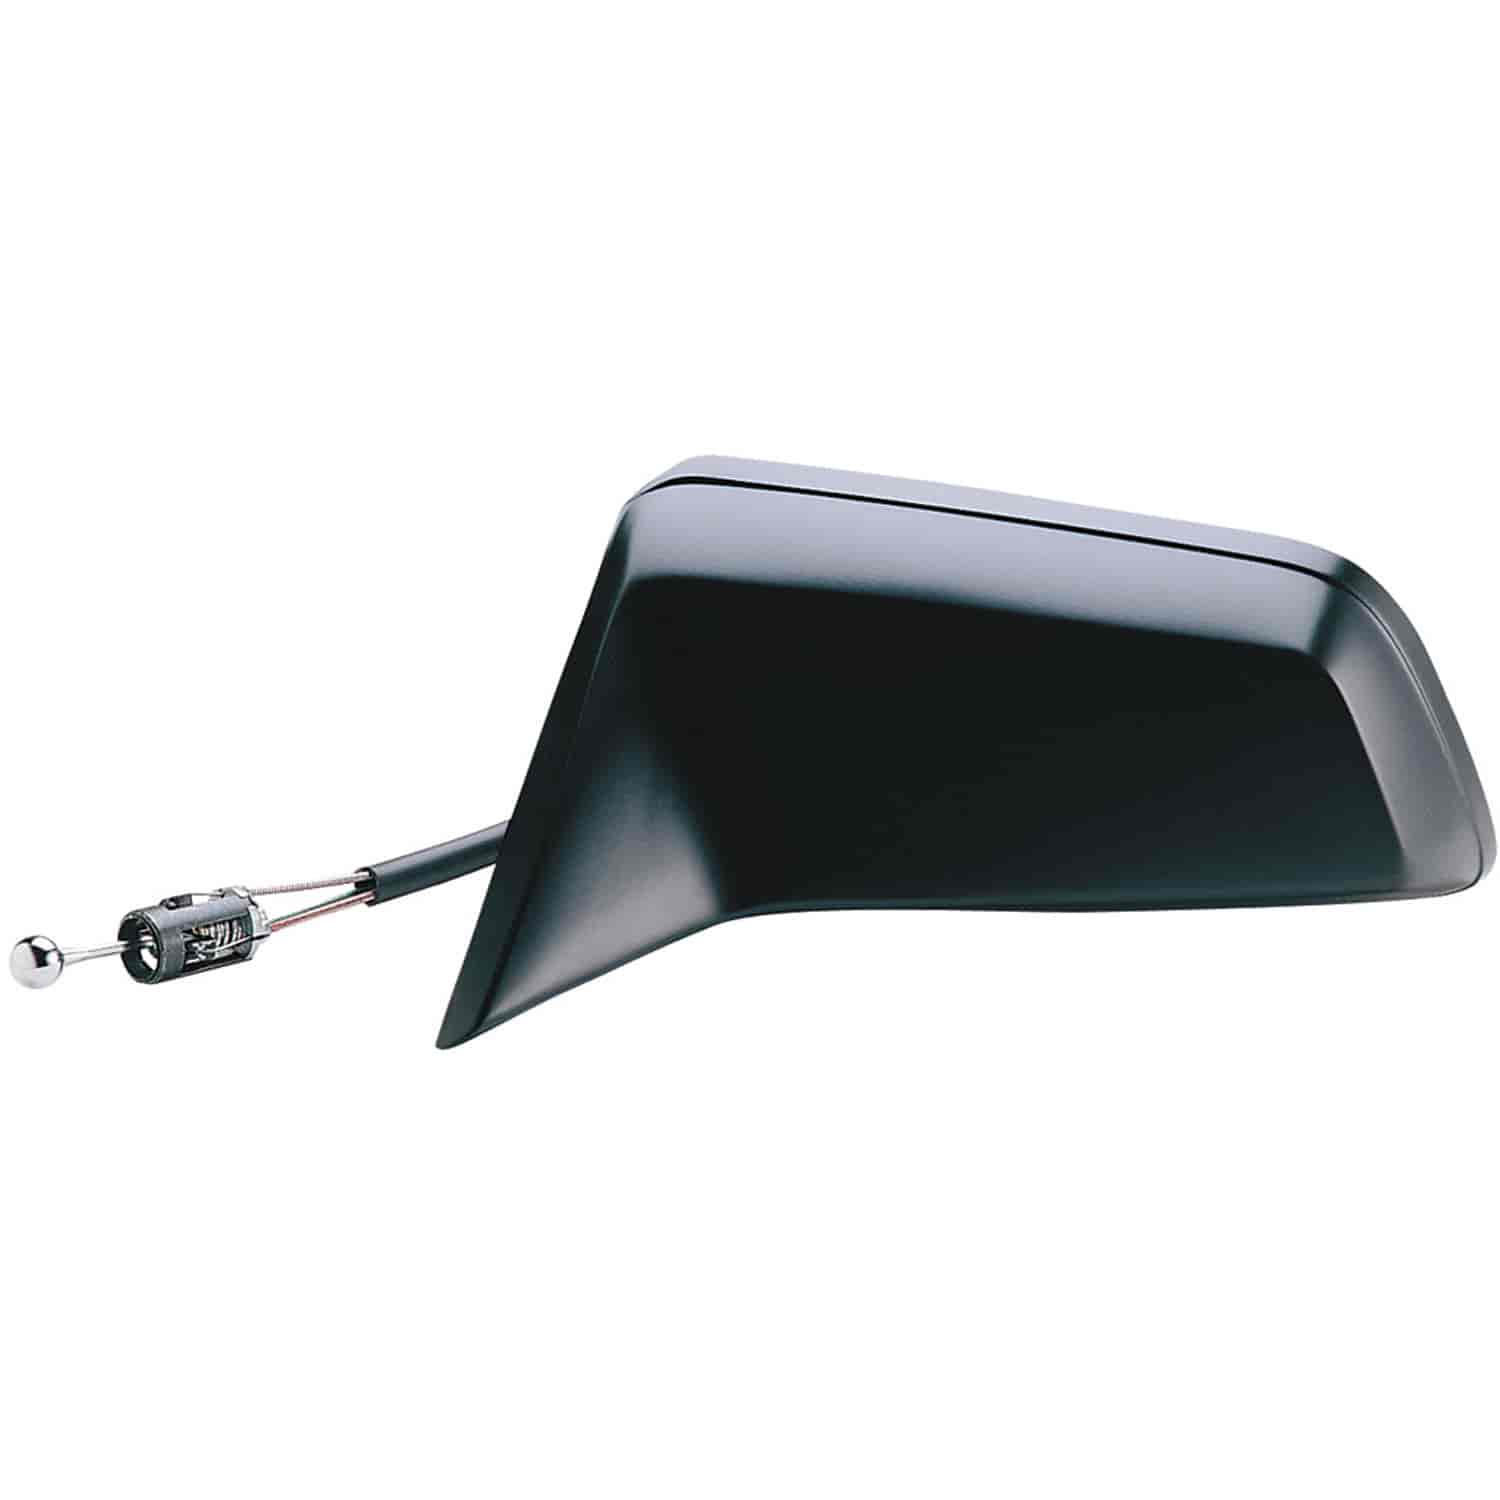 OEM Style Replacement mirror for 82-96 Buick Century 92-90 Chevy Celebrity Sport 93-94 Olds. Cutlass